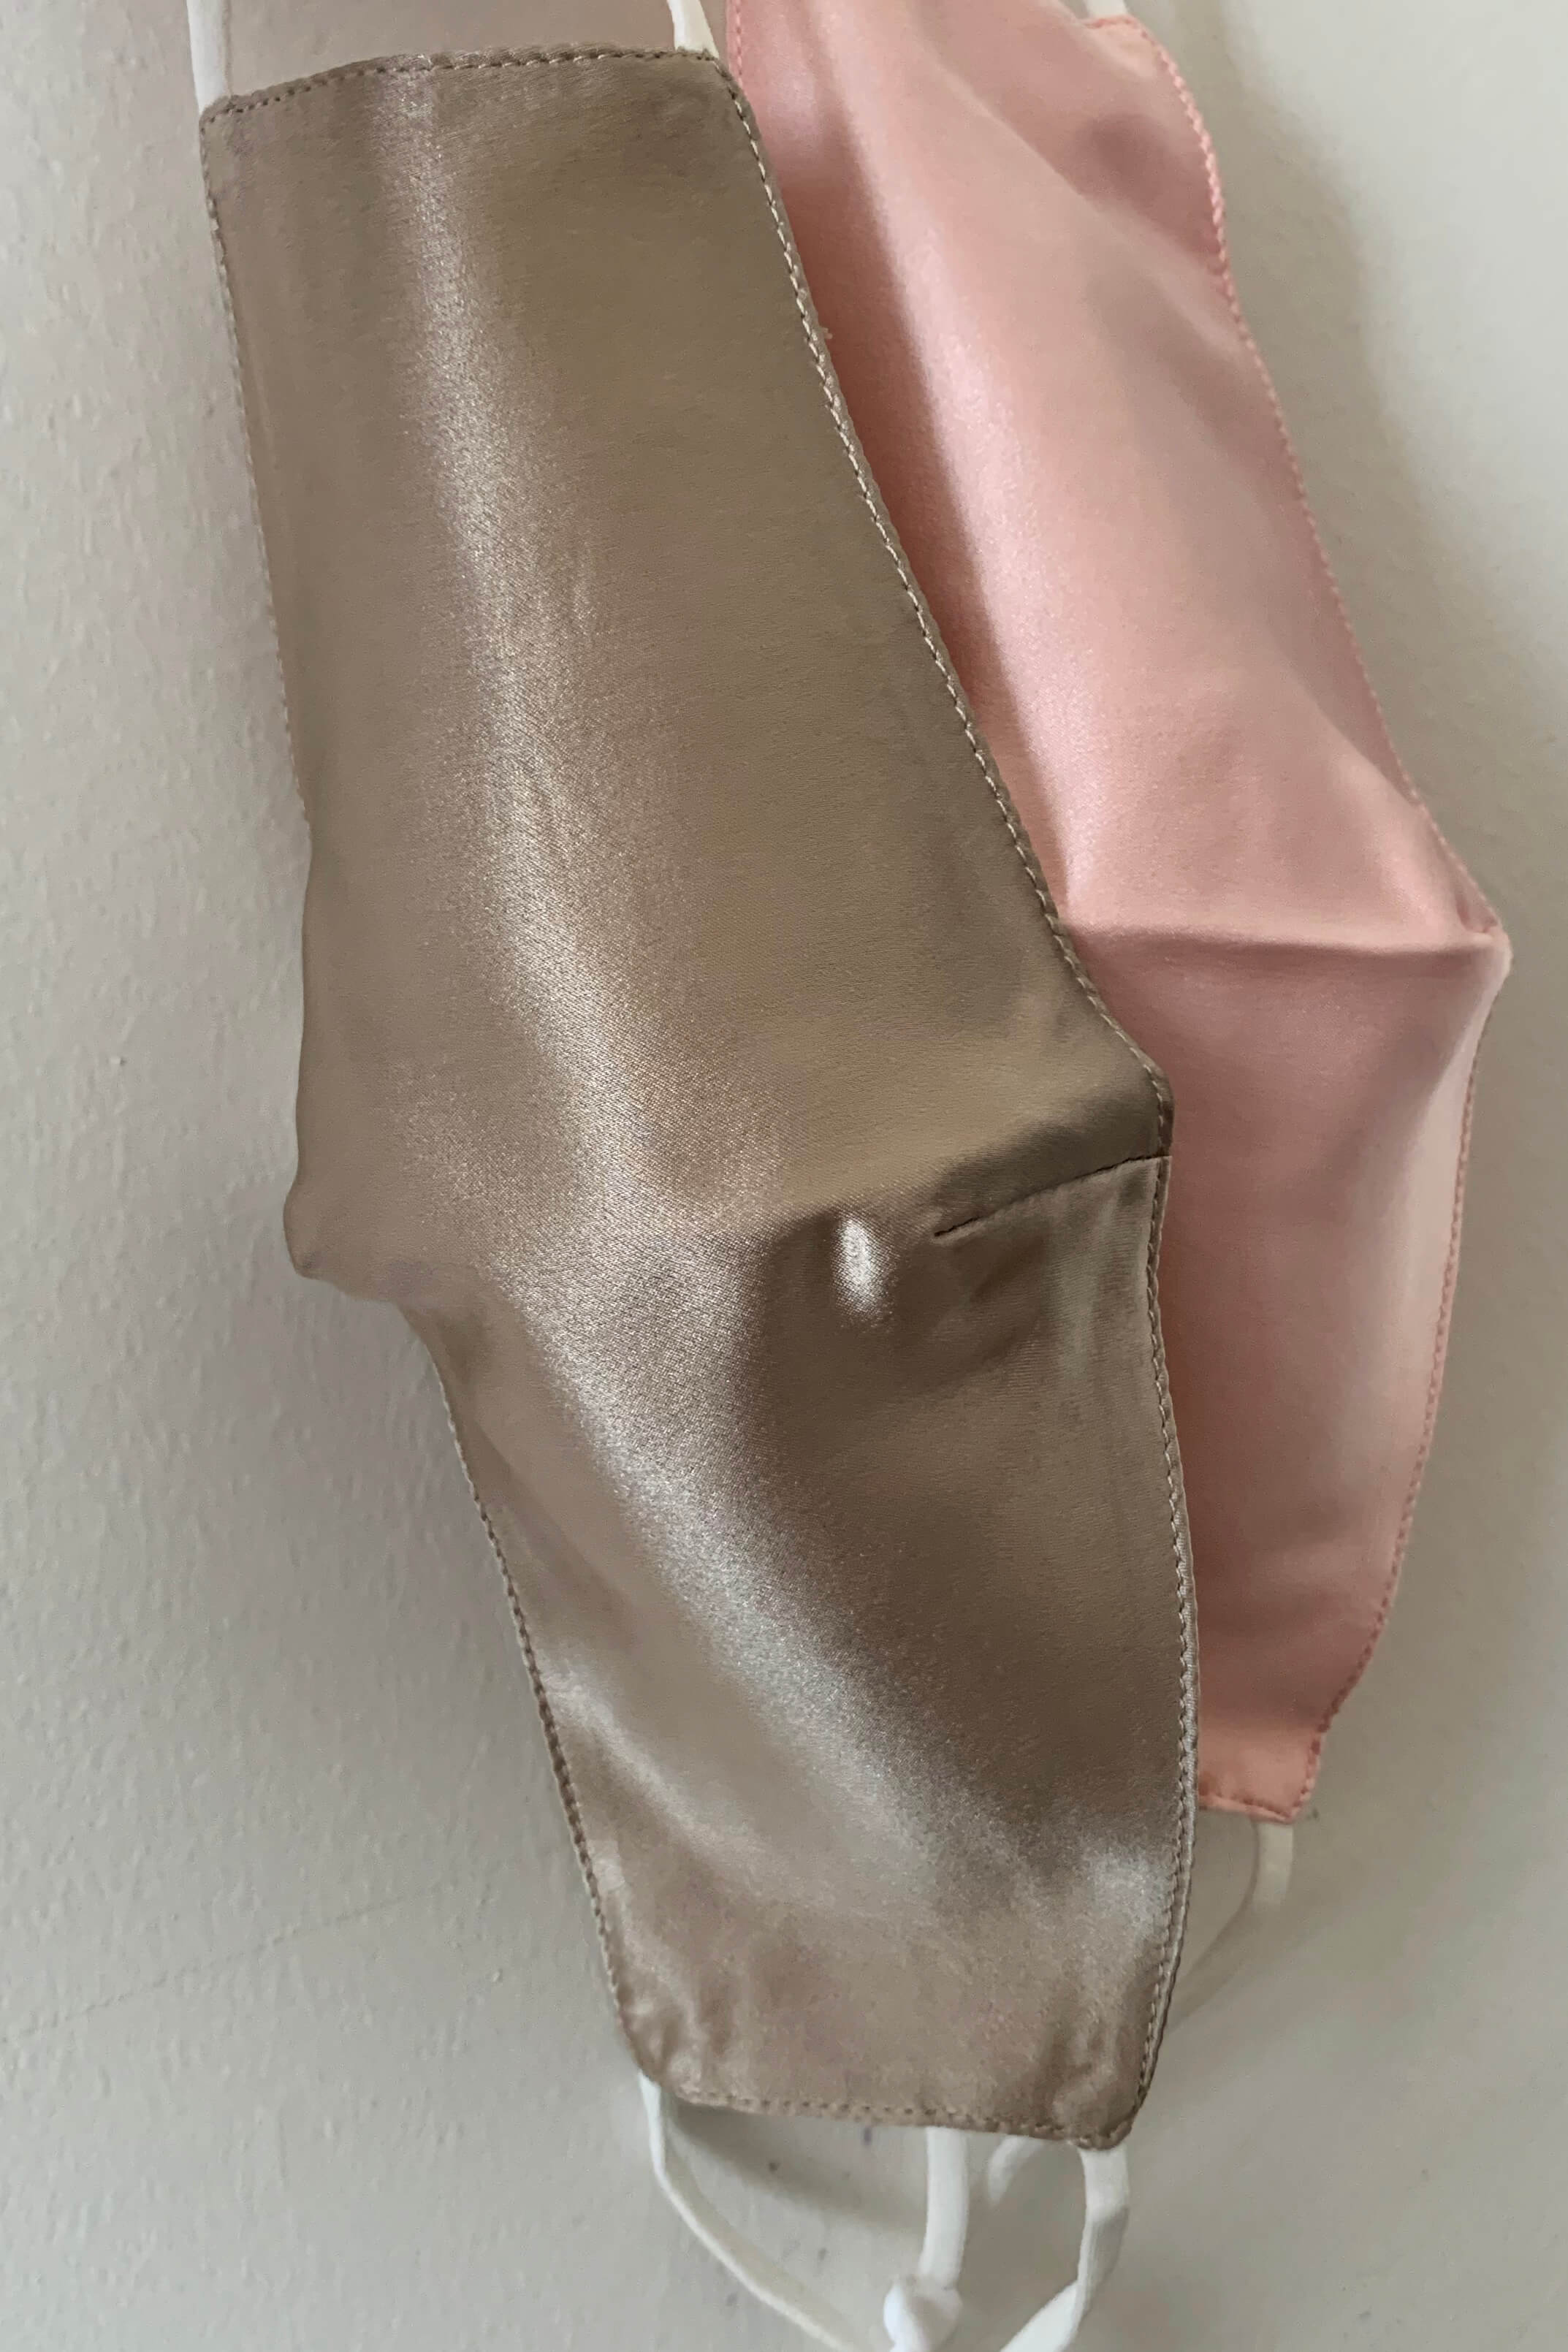 ULTRA Silk Face Covering - Pink (No filter pocket. No nose wire) - BASK ™